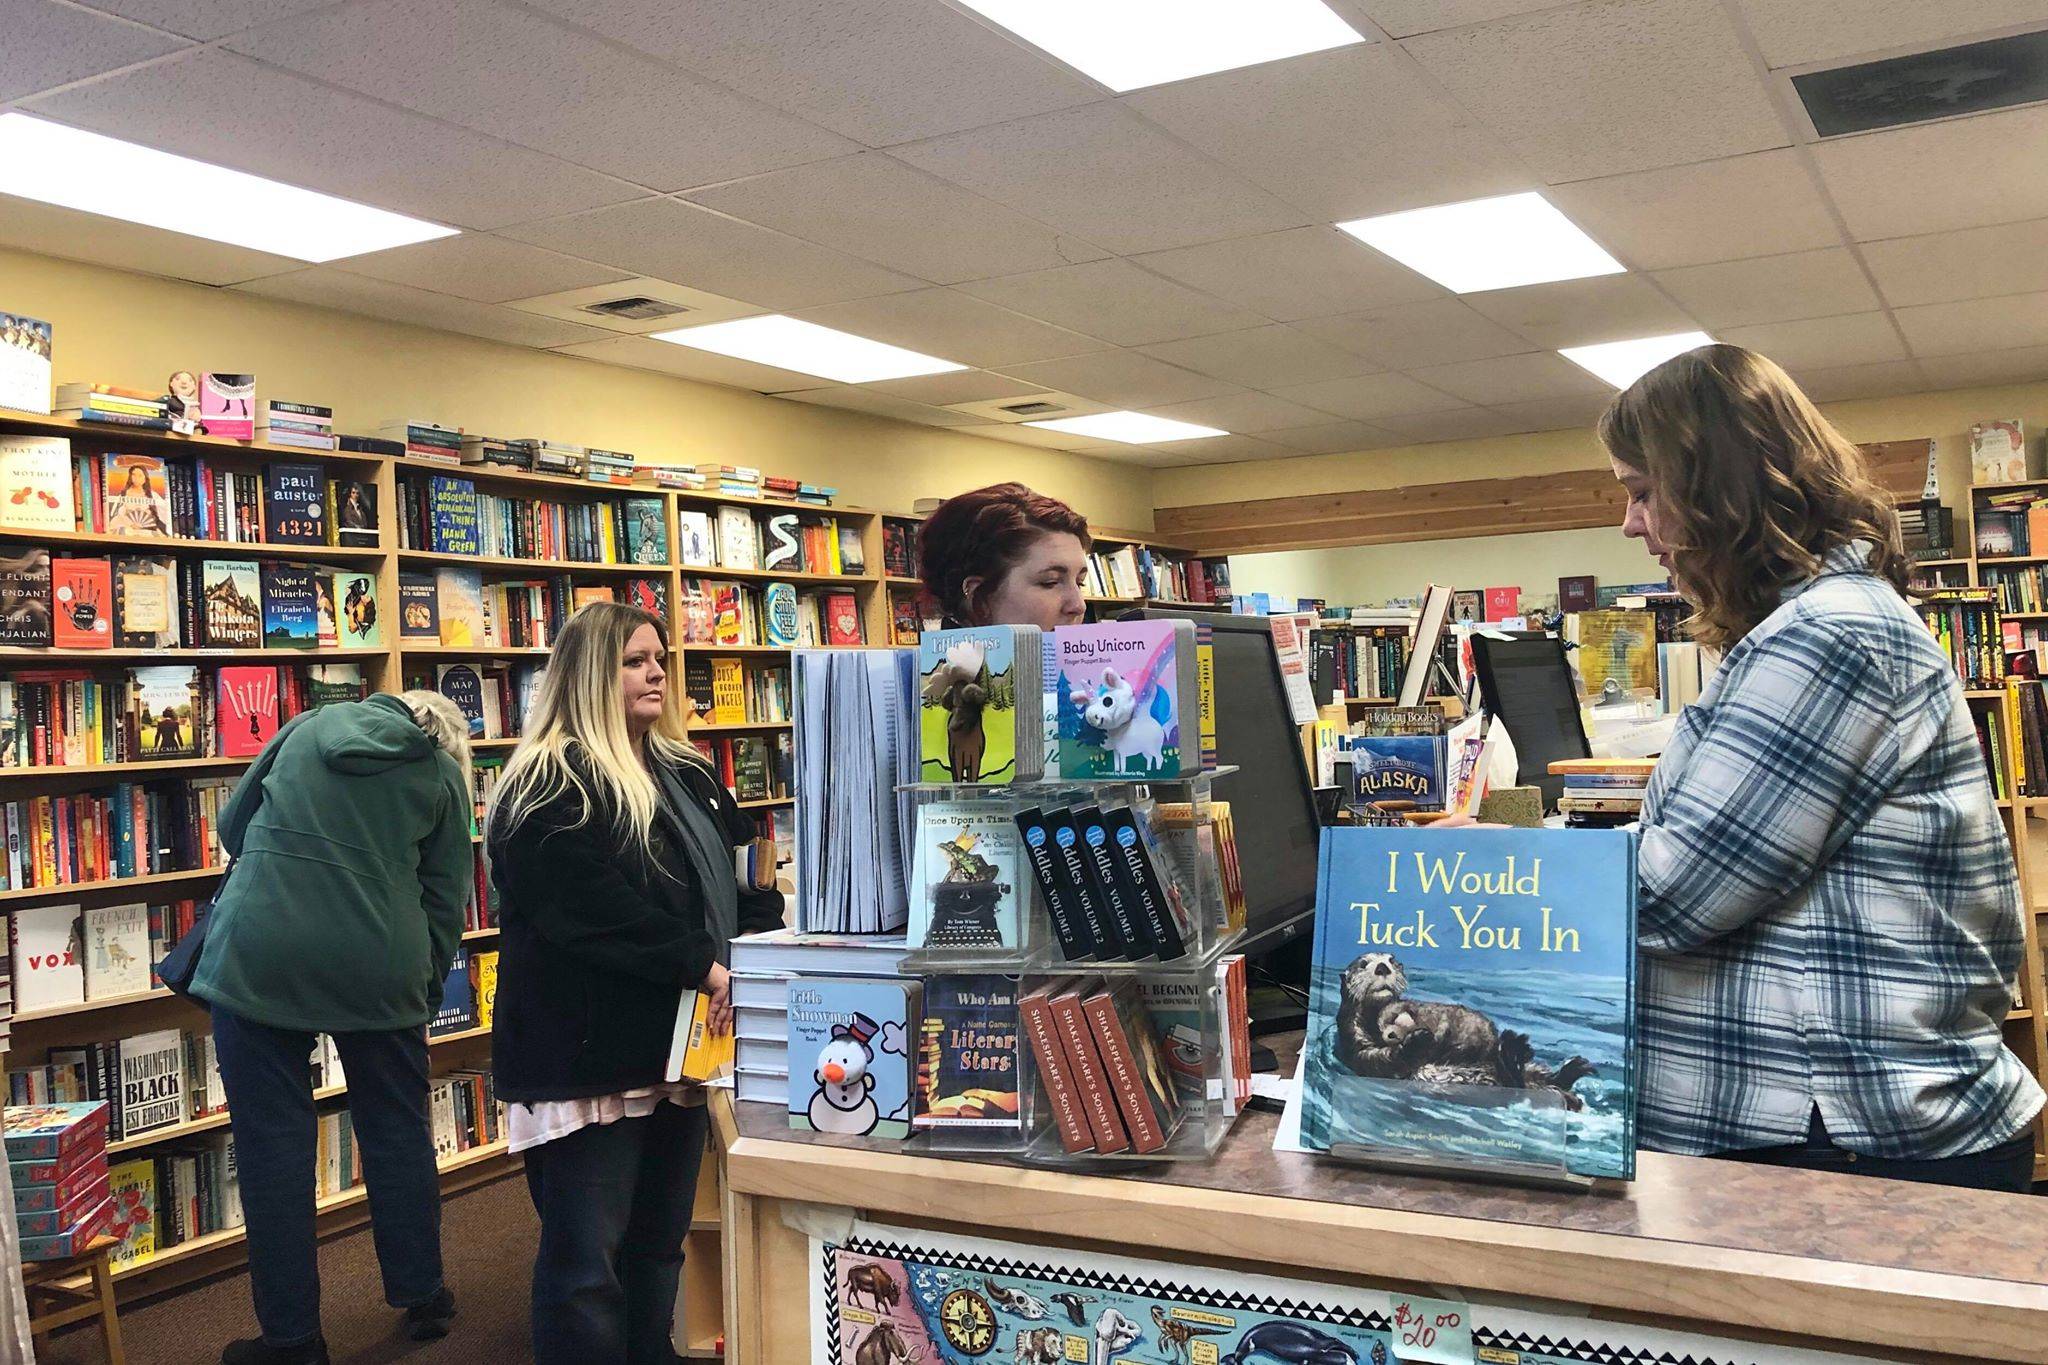 Shoppers make book purchases during the busy holiday shopping season at River City Books in Soldotna on Friday. (Photo by Victoria Petersen/Peninsula Clarion)